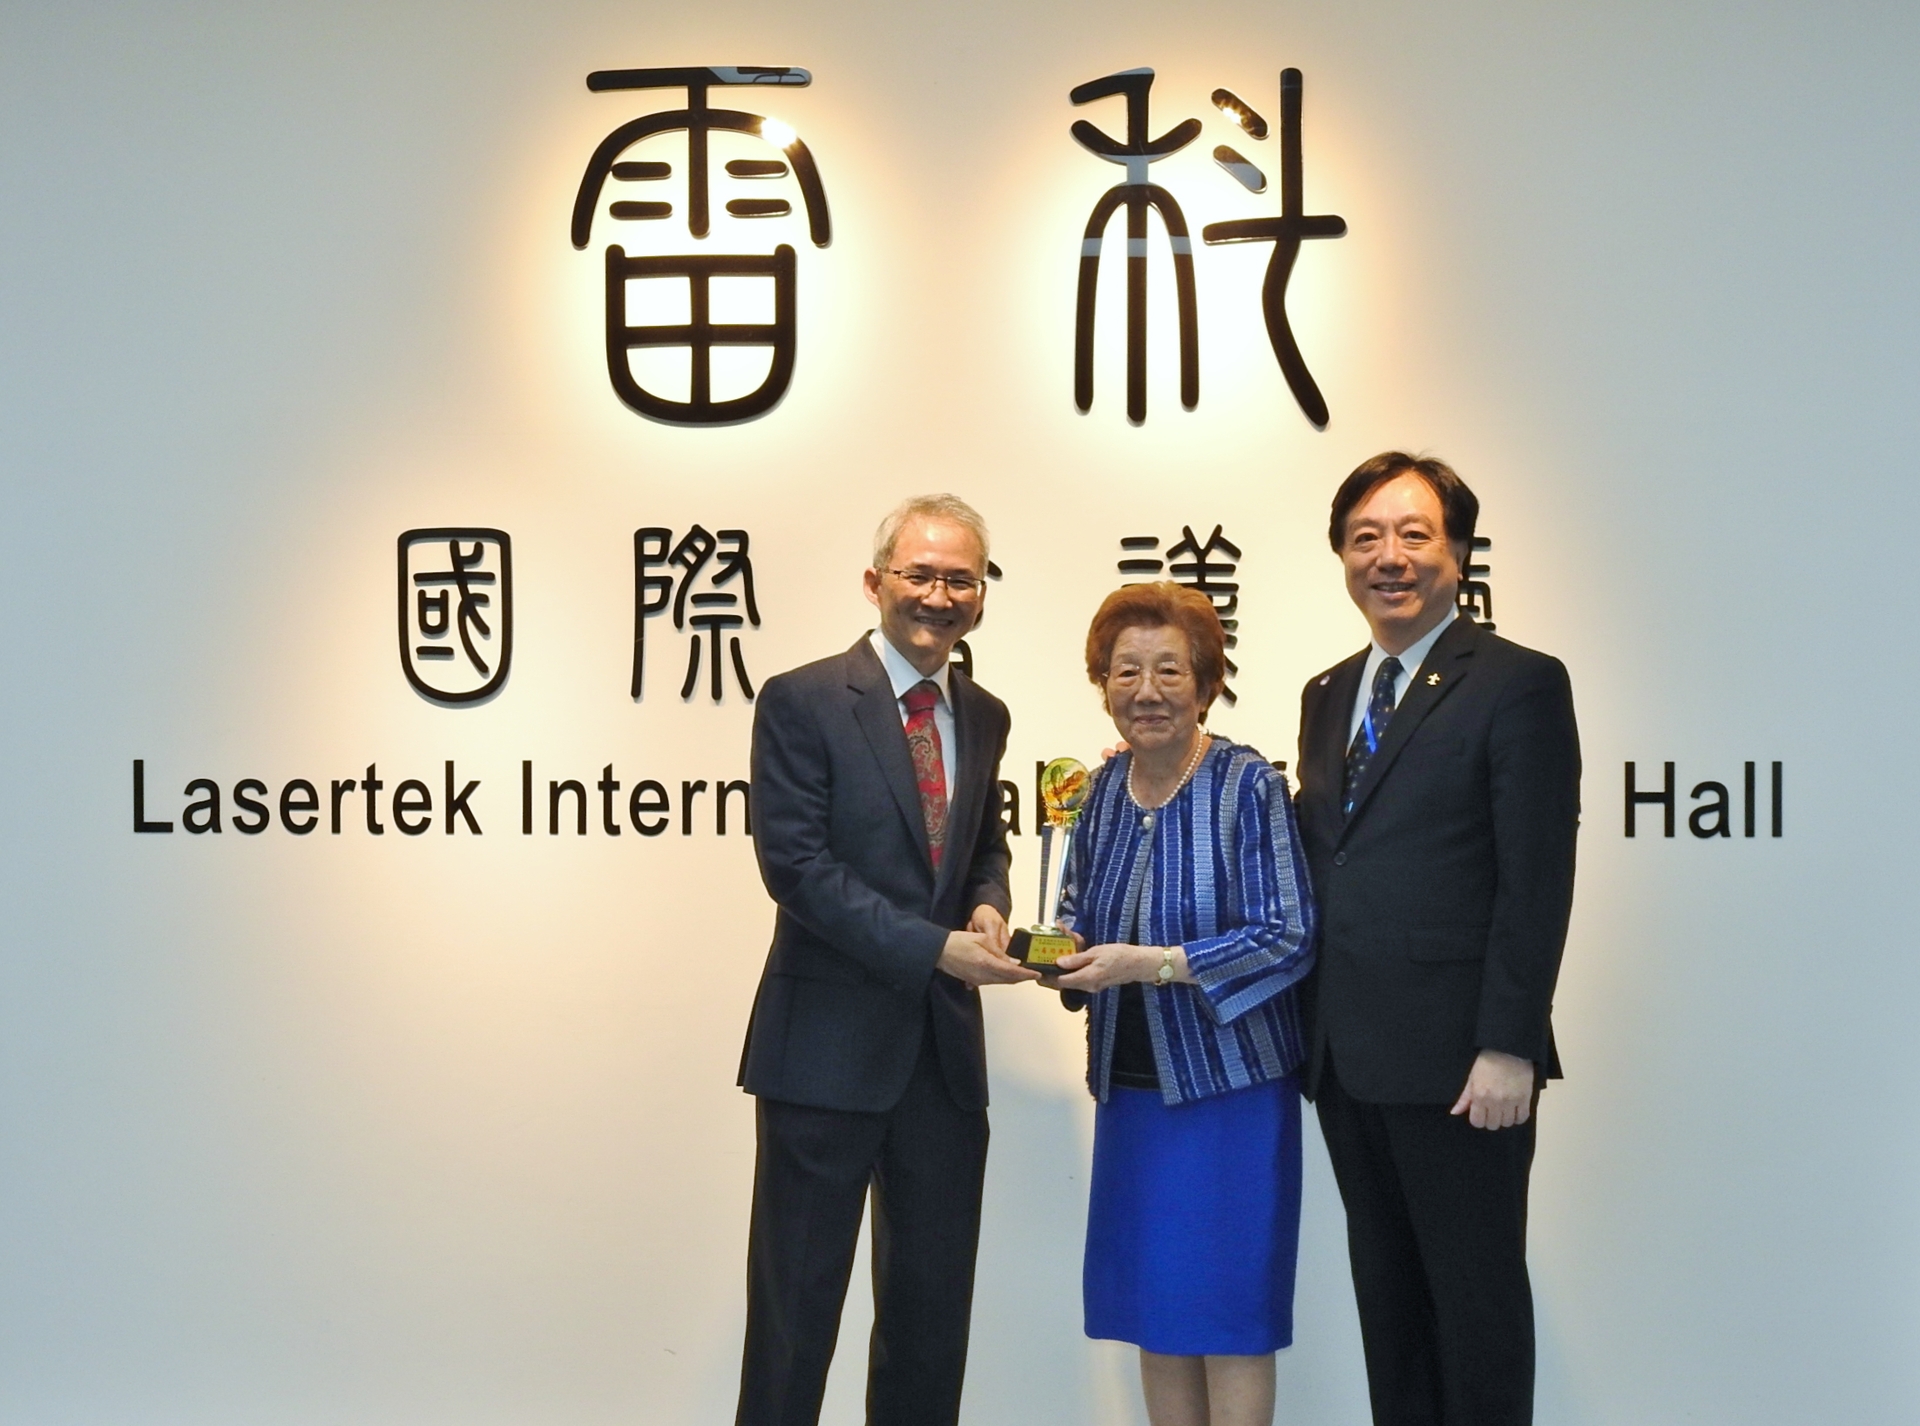 Dean San-Yih Hwang, College of Management (left) presented a token of appreciation to Chairman Tsai-Hsing Cheng and his mother (middle).